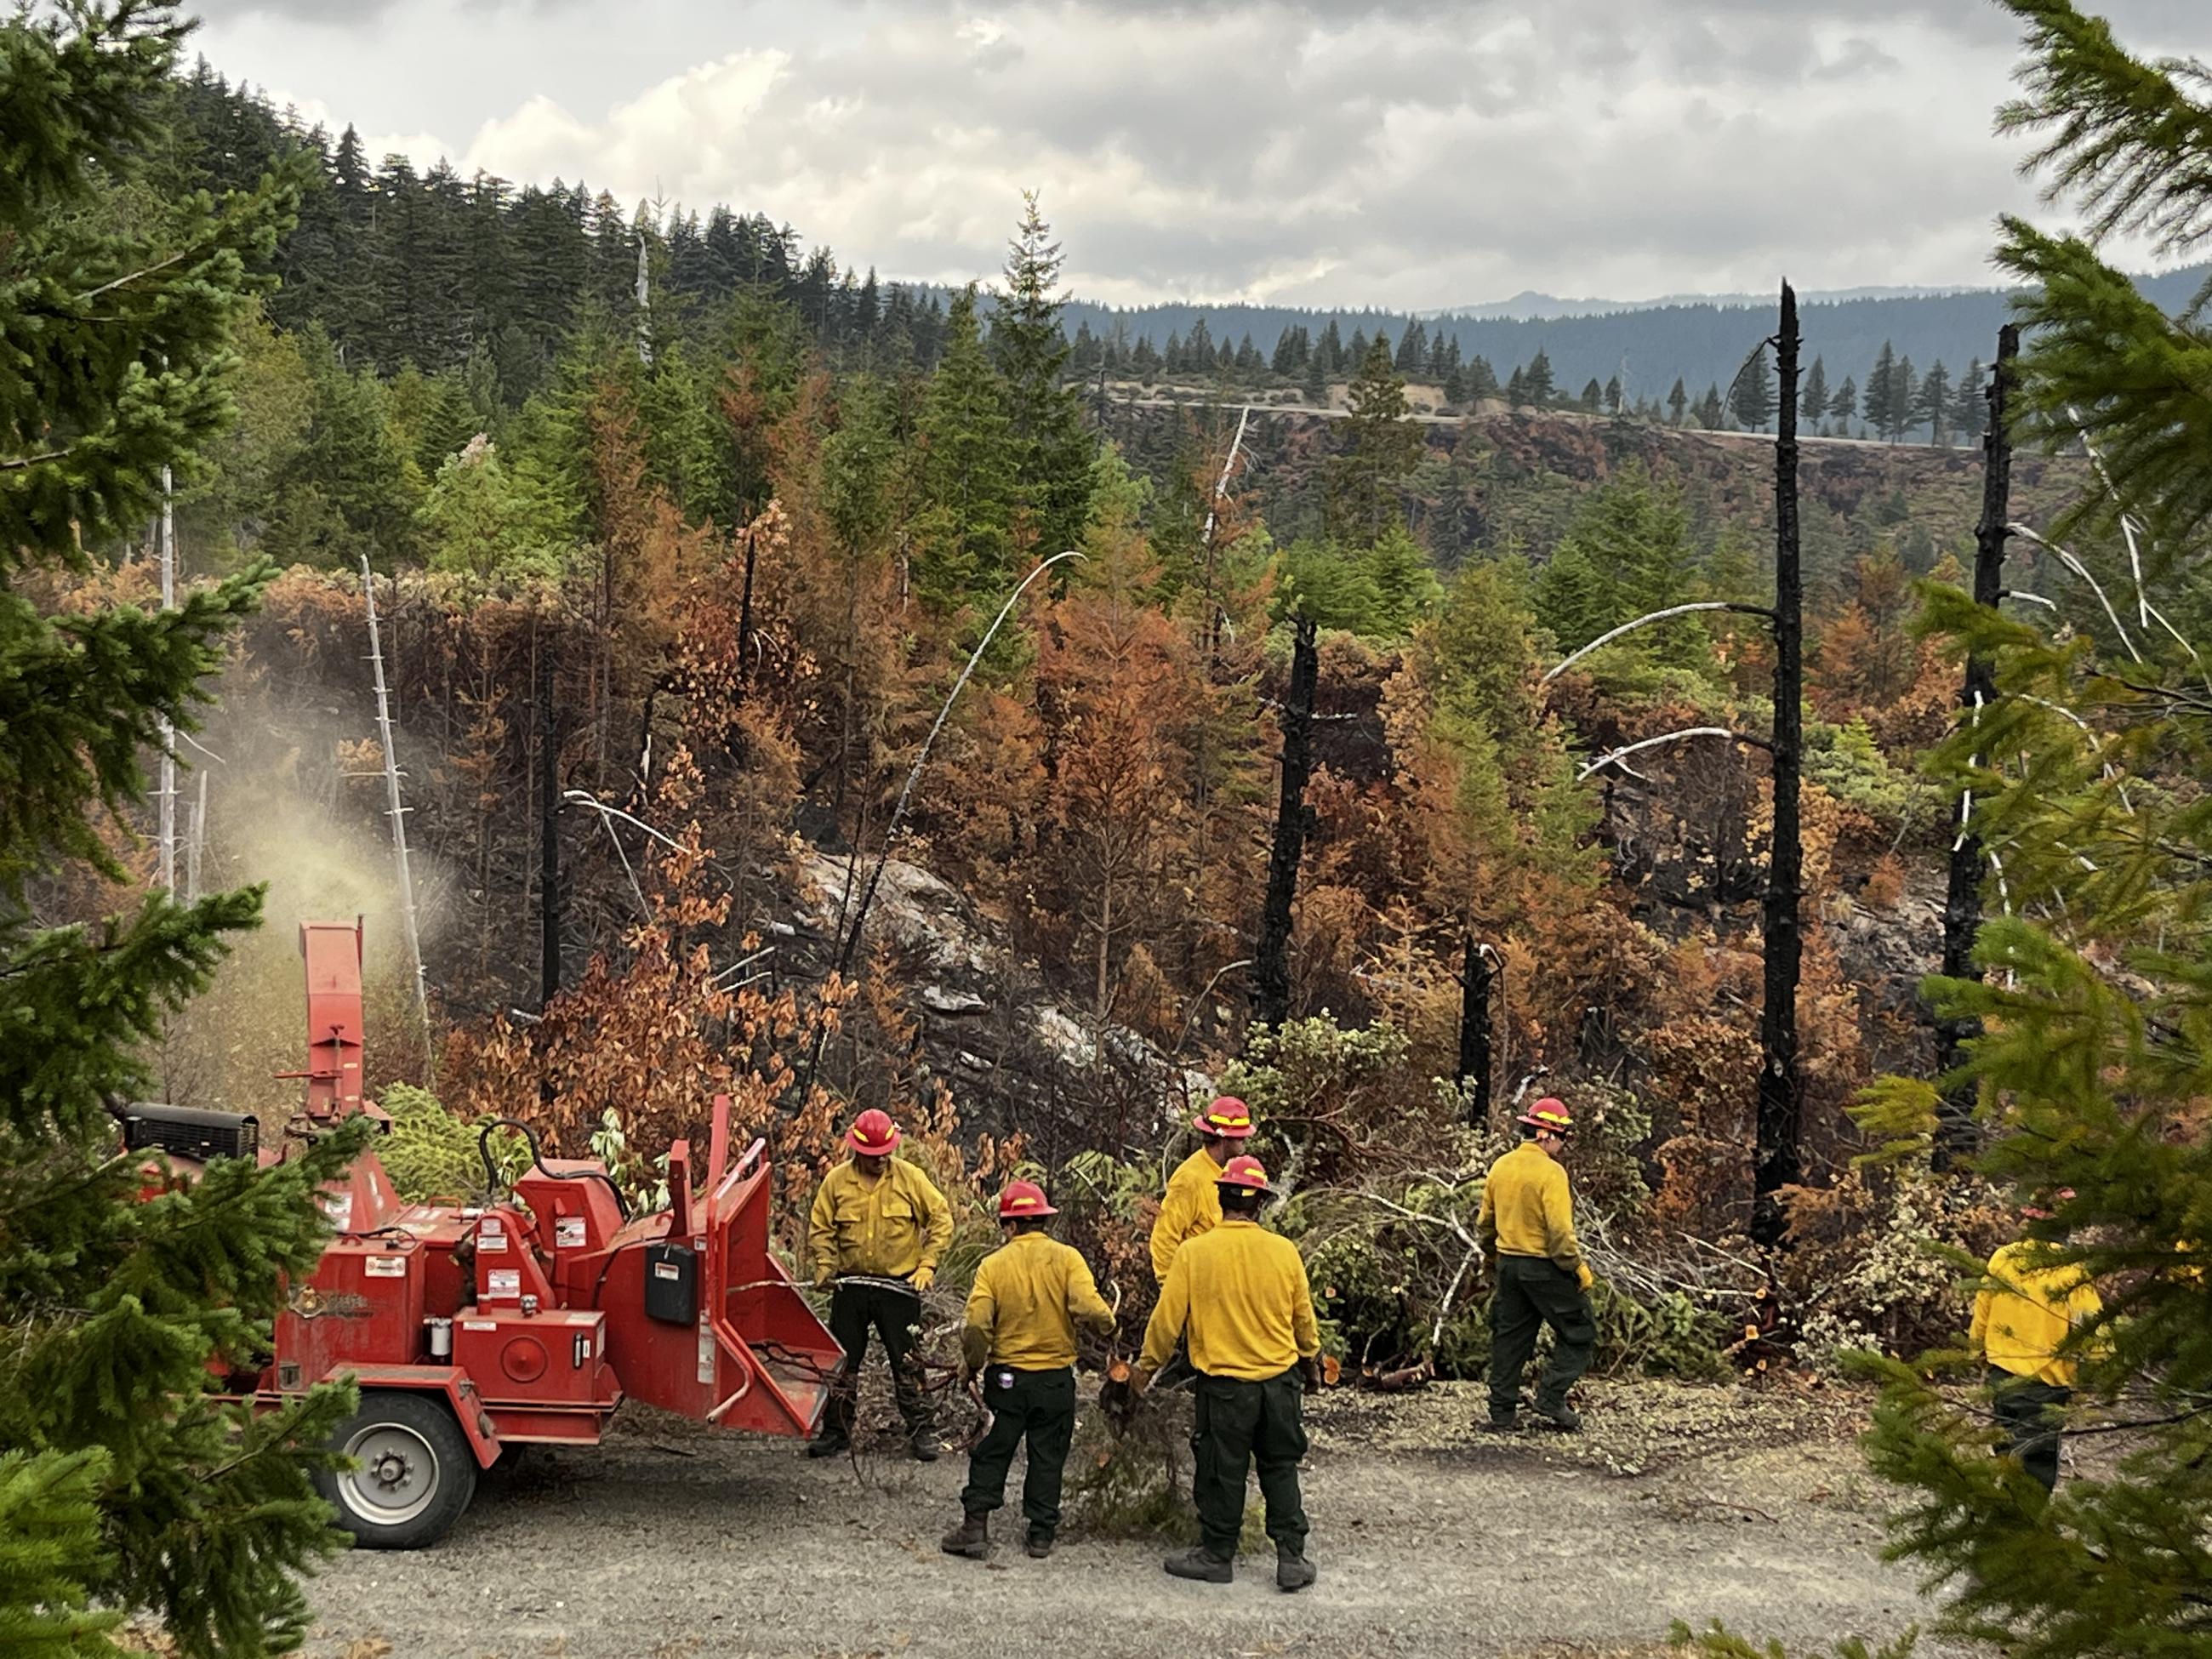 Several firefighters in green and yellow nomex with red hard hats use a red chipping machine in front of a burned forest.